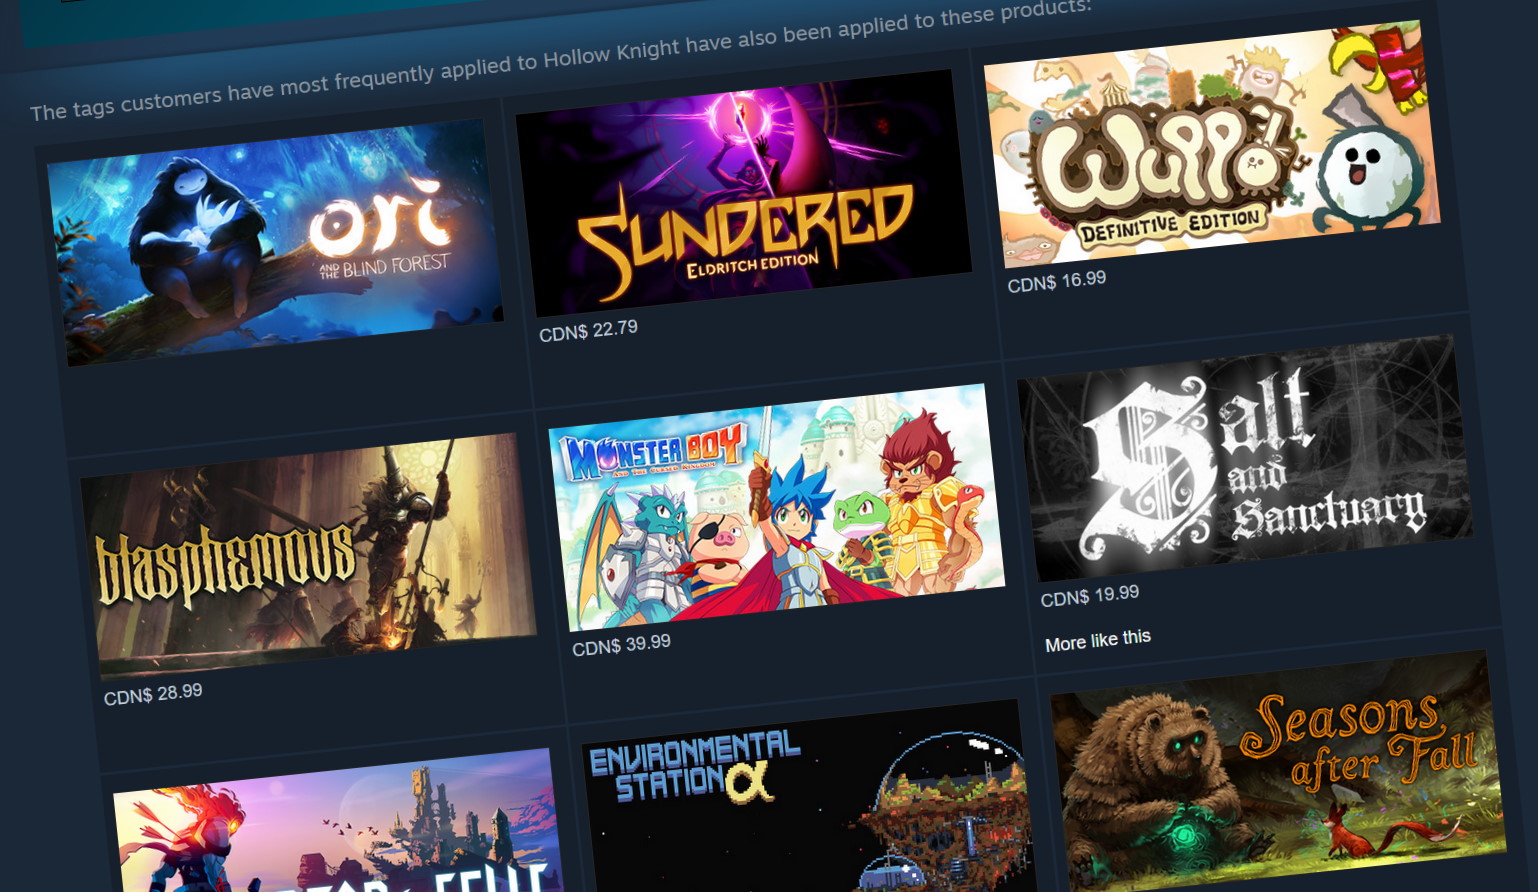 Valve updates Steam store pages to reduce the number of trailers you see